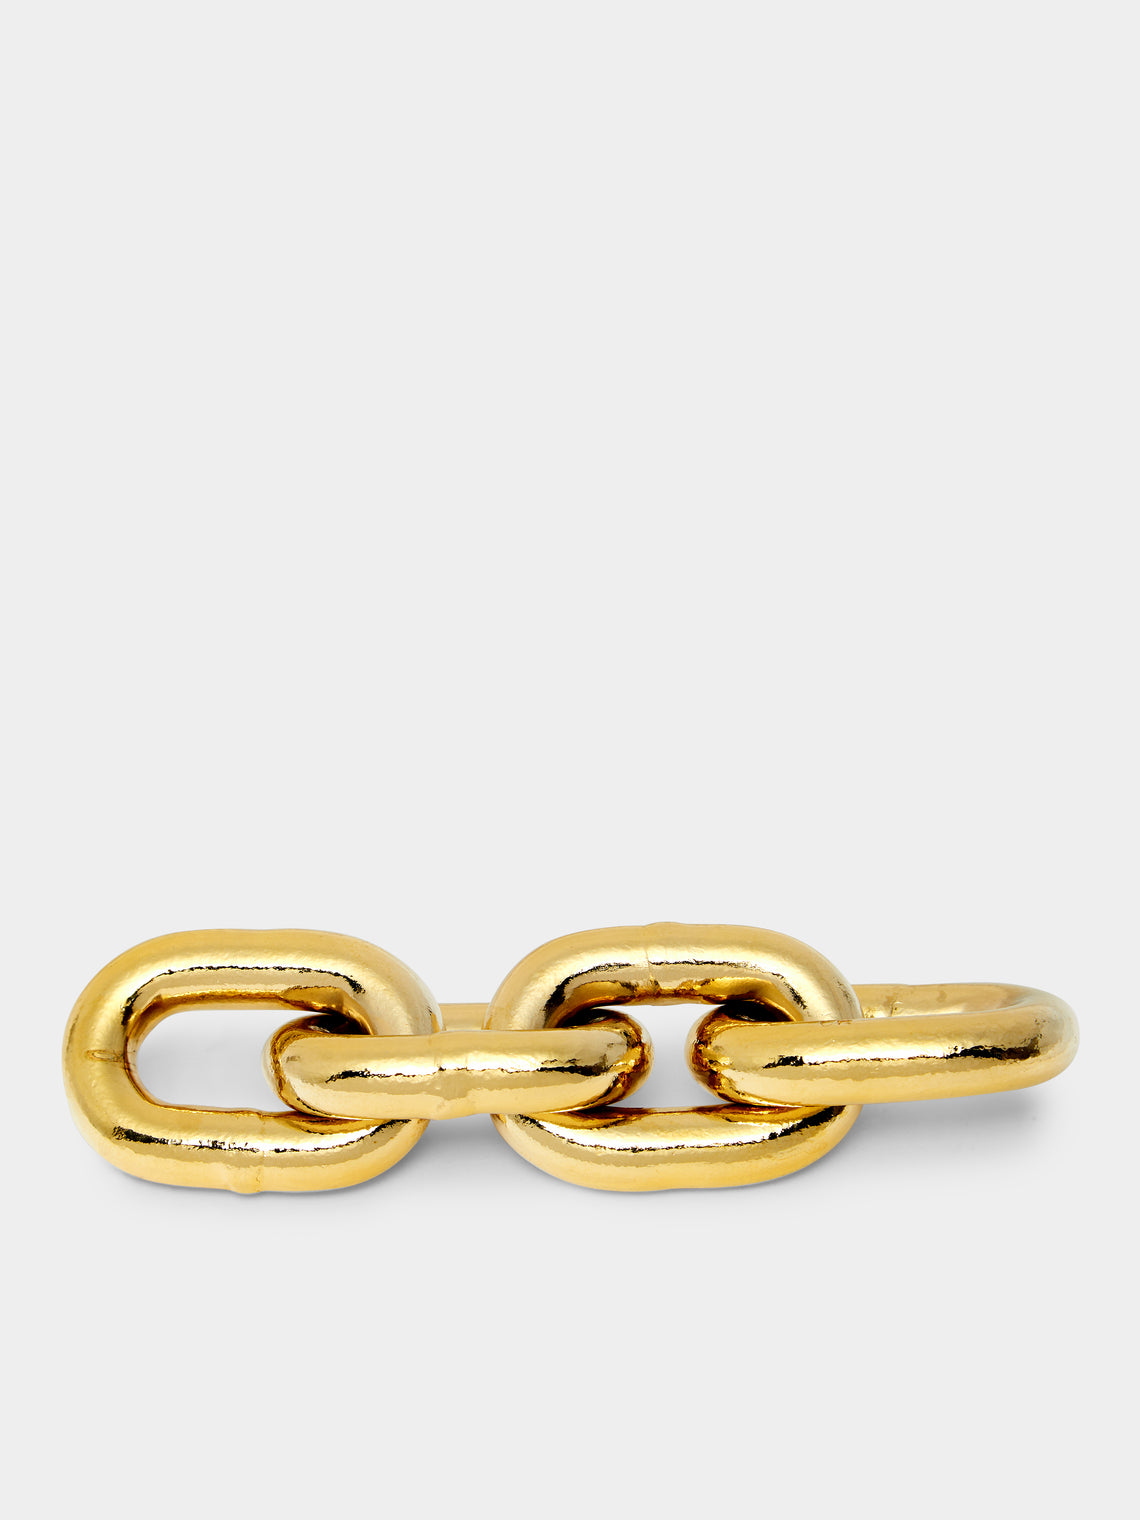 Carl Auböck - Brass Chain Link Paperweight - Gold - ABASK - 